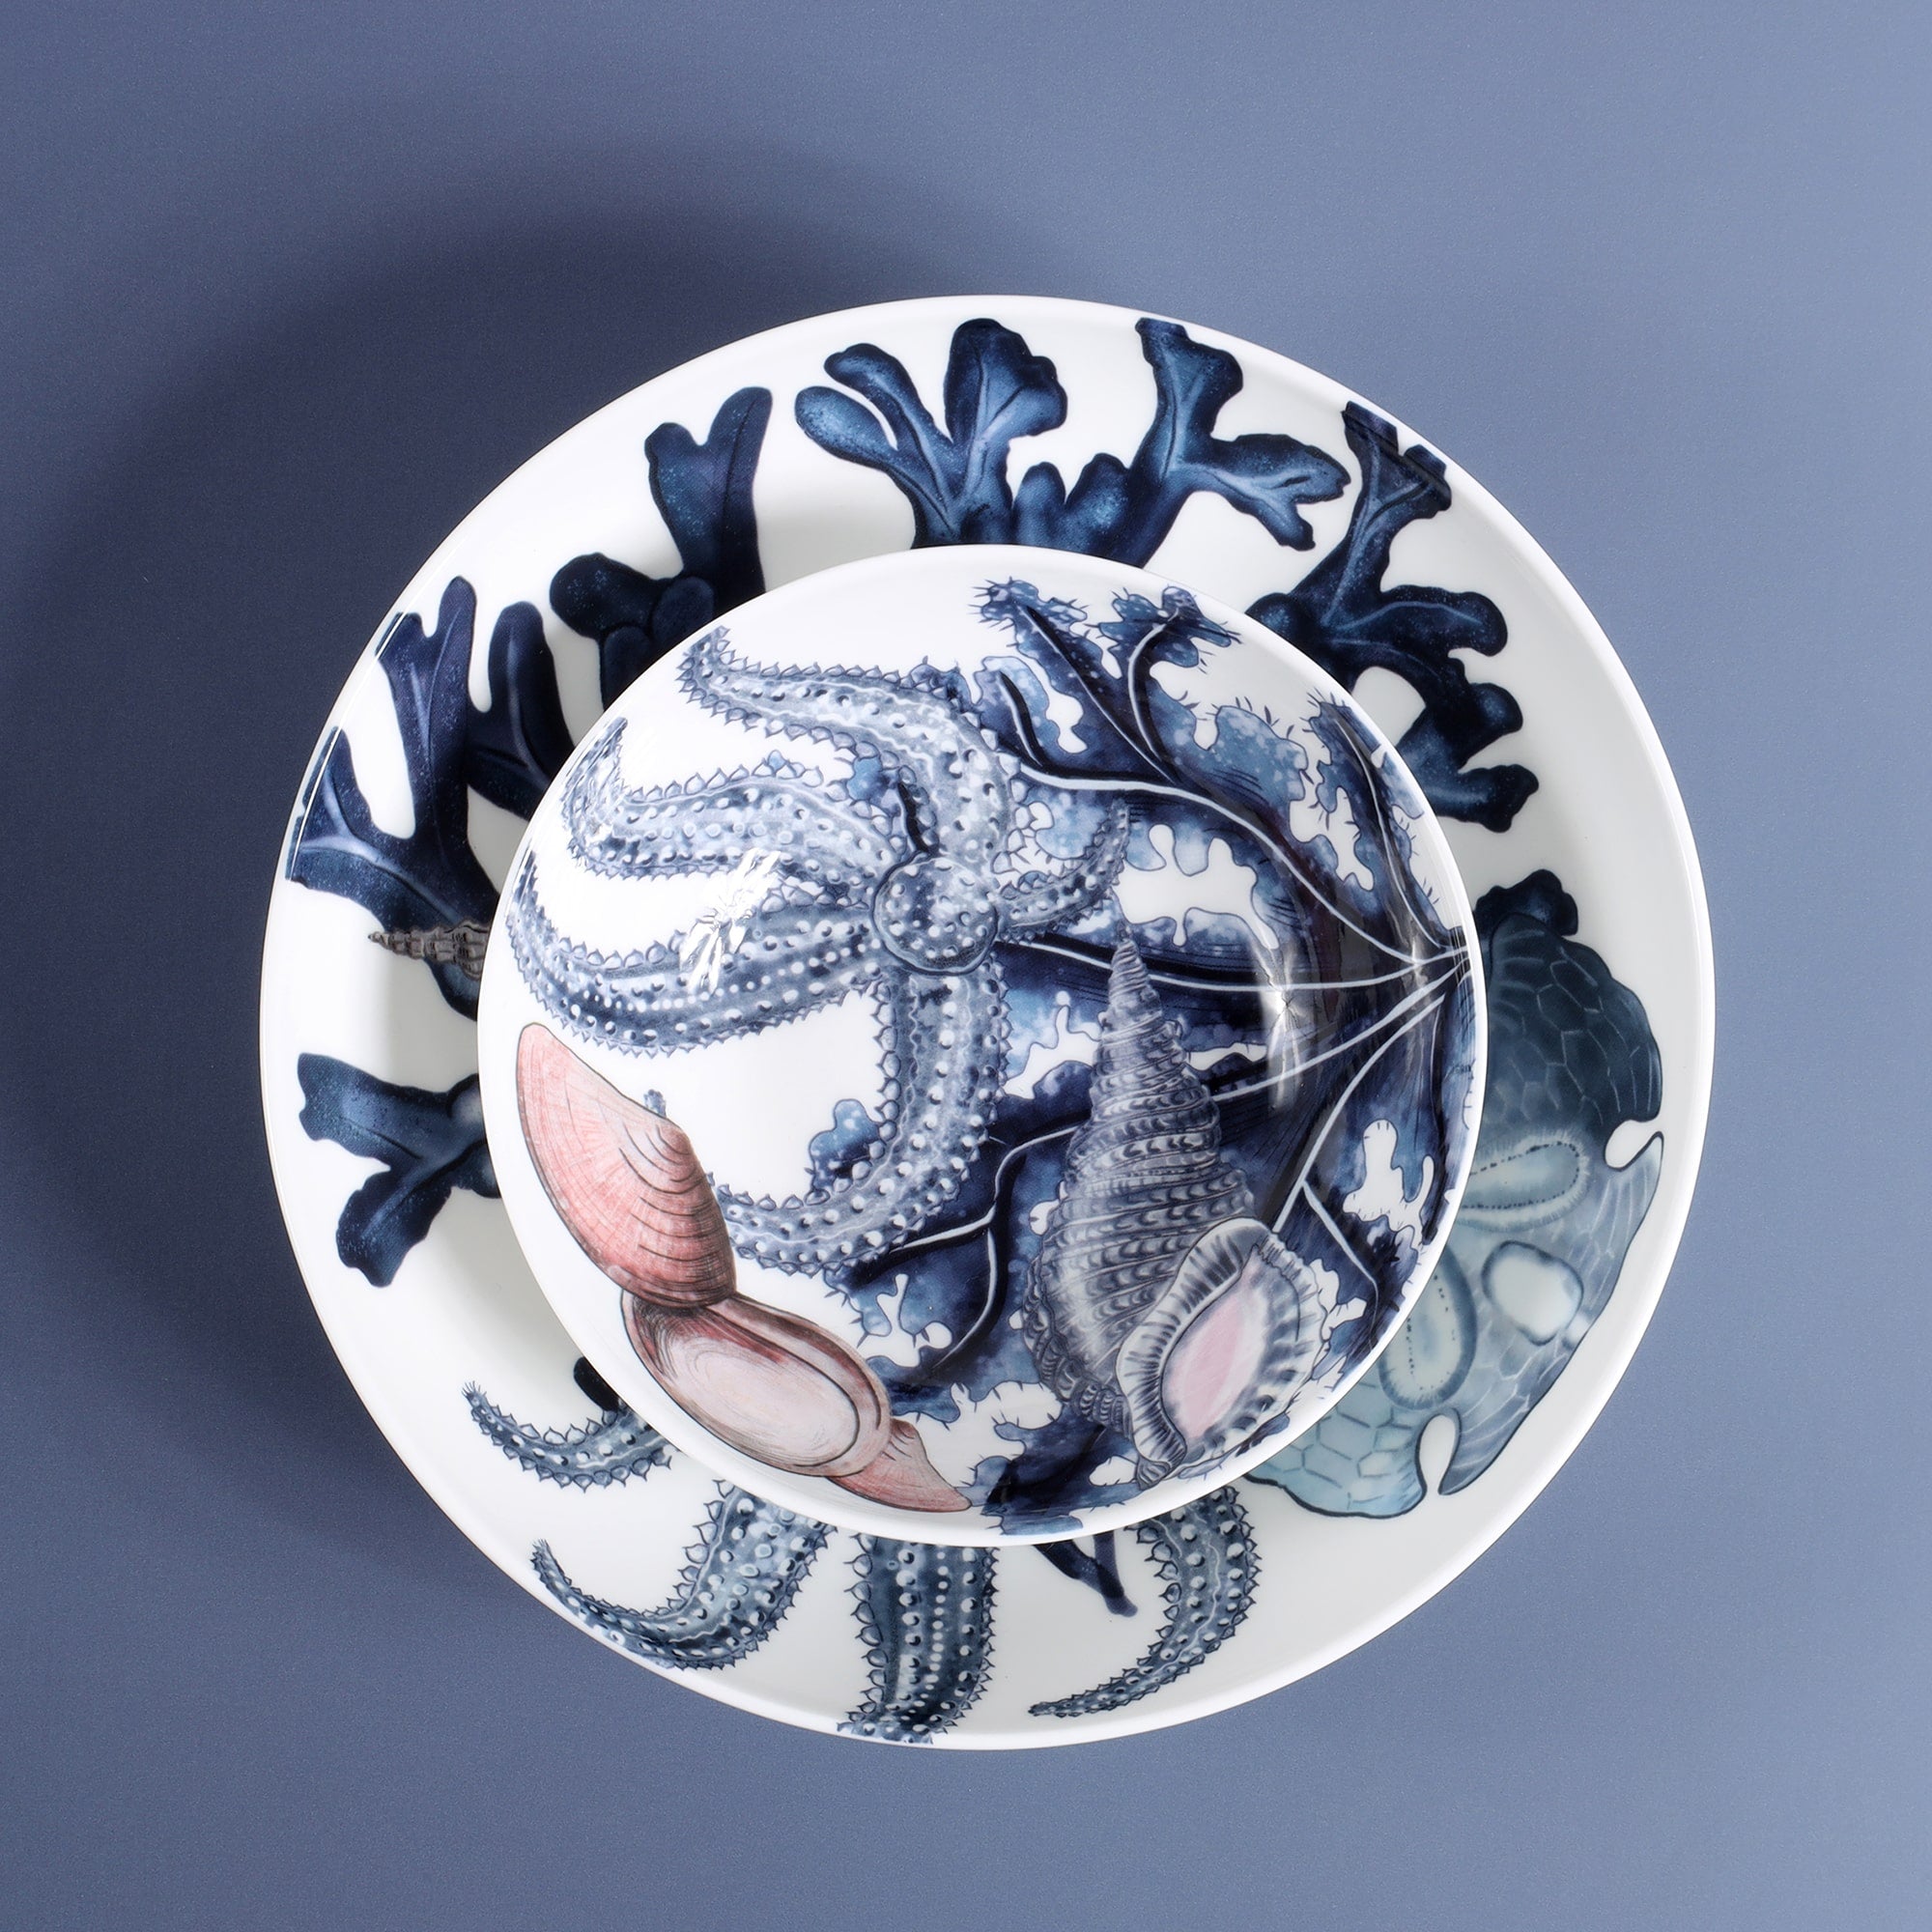 Bone China White bowl with hand drawn illustration of our Beachcomber range decorated with a starfish,seaweed and shells placed inside of a matching Beachcomber pasta bowl